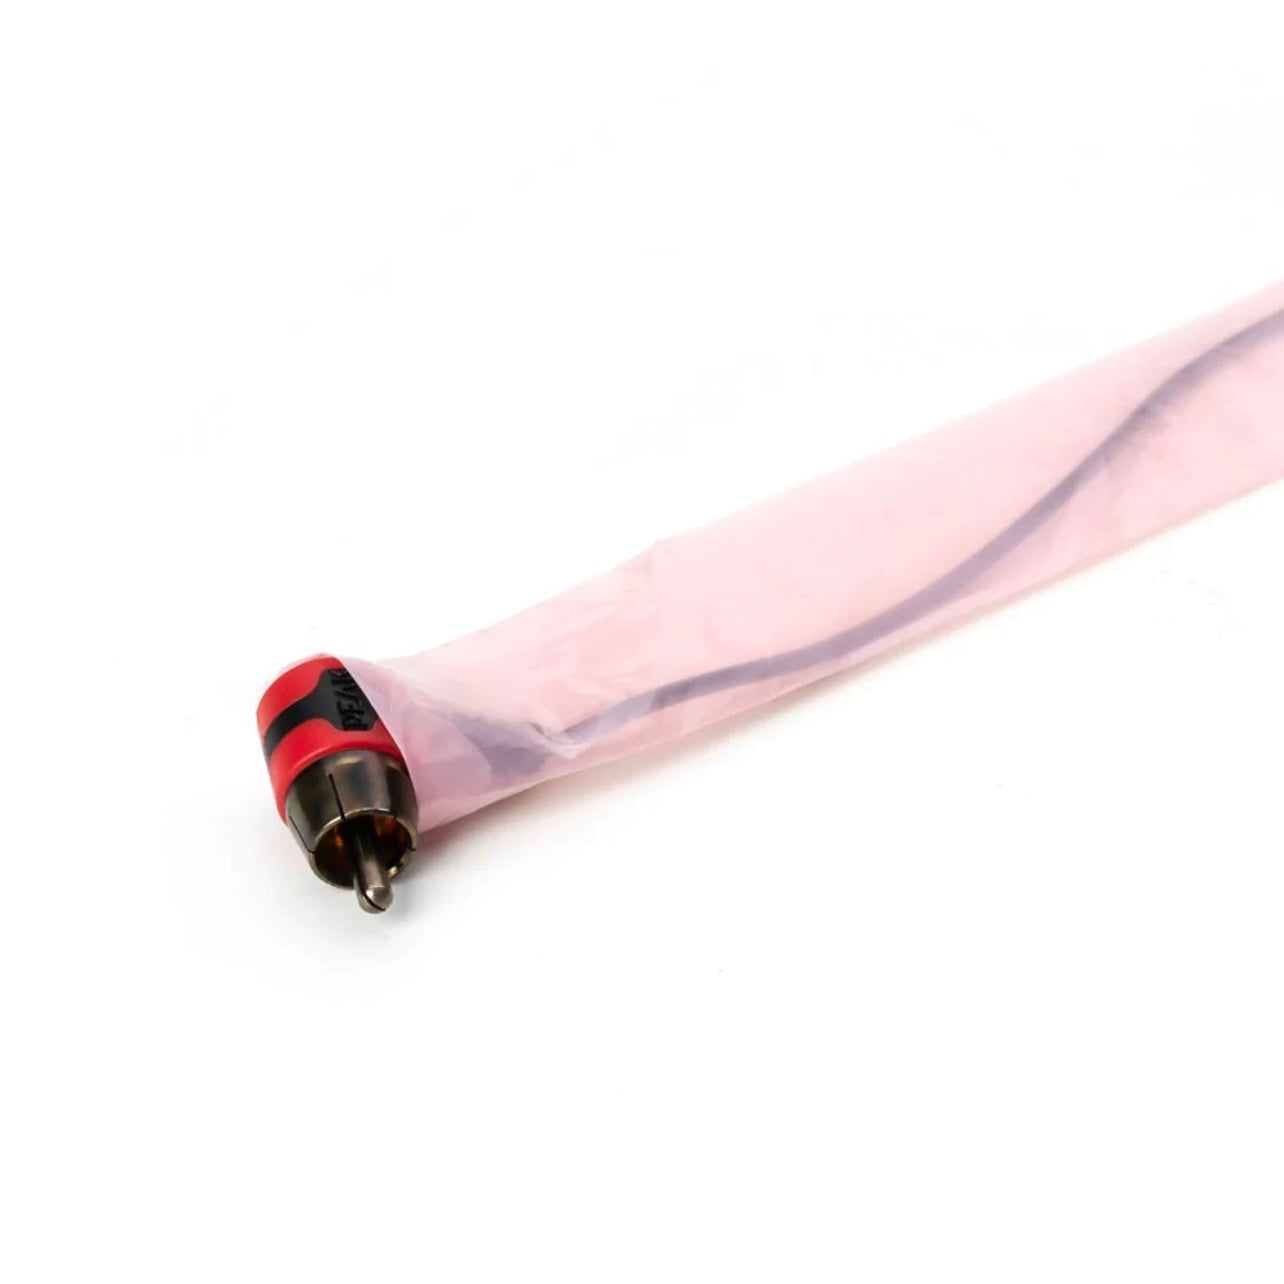 SAFERLY RCA CORD TUBING - PINK